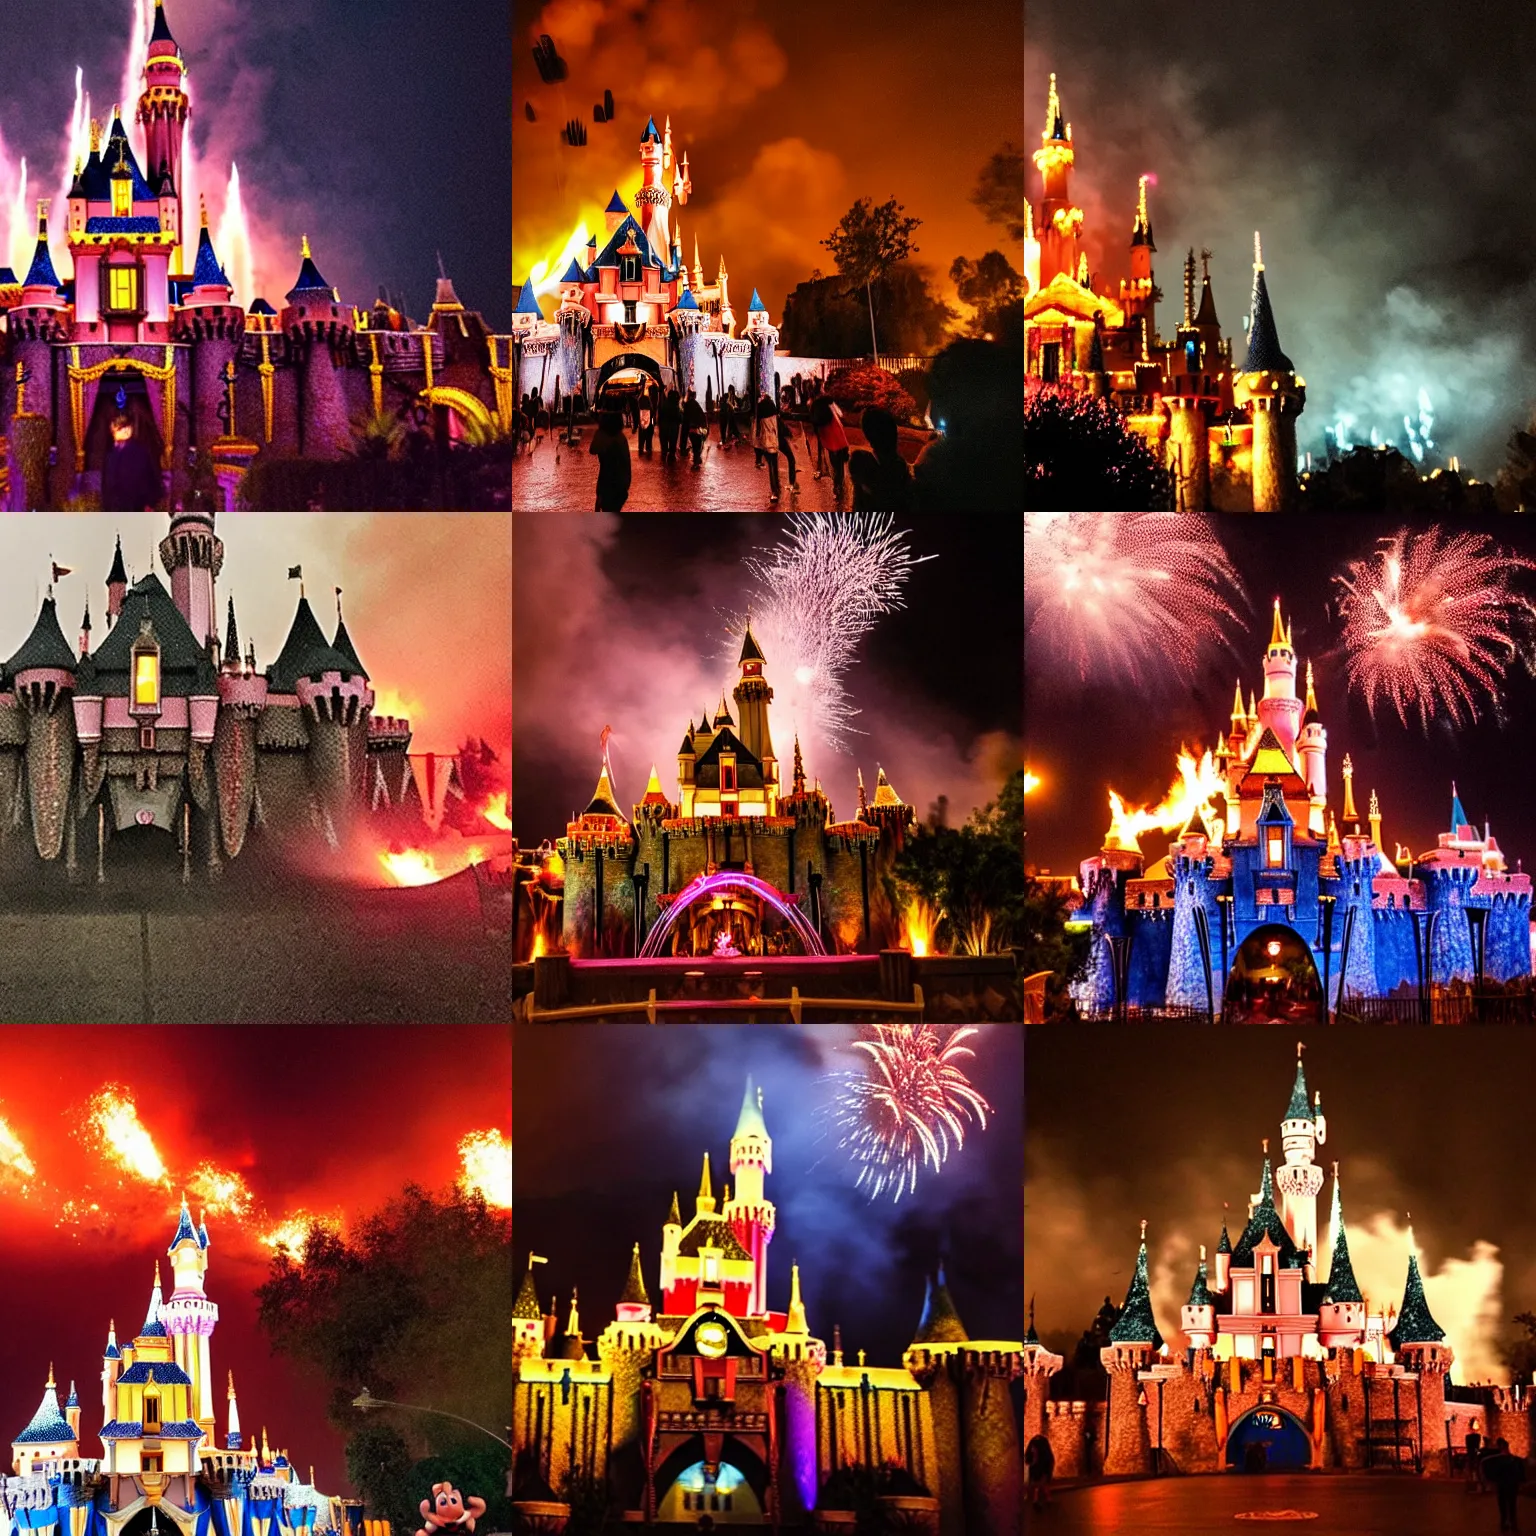 Prompt: photo of the Disneyland castle on fire, burning at night, fireworks in the sky raining down glowing embers and burning debris, lots of smoke, fire, fire, fire, night, night, night. cursed images, found footage.